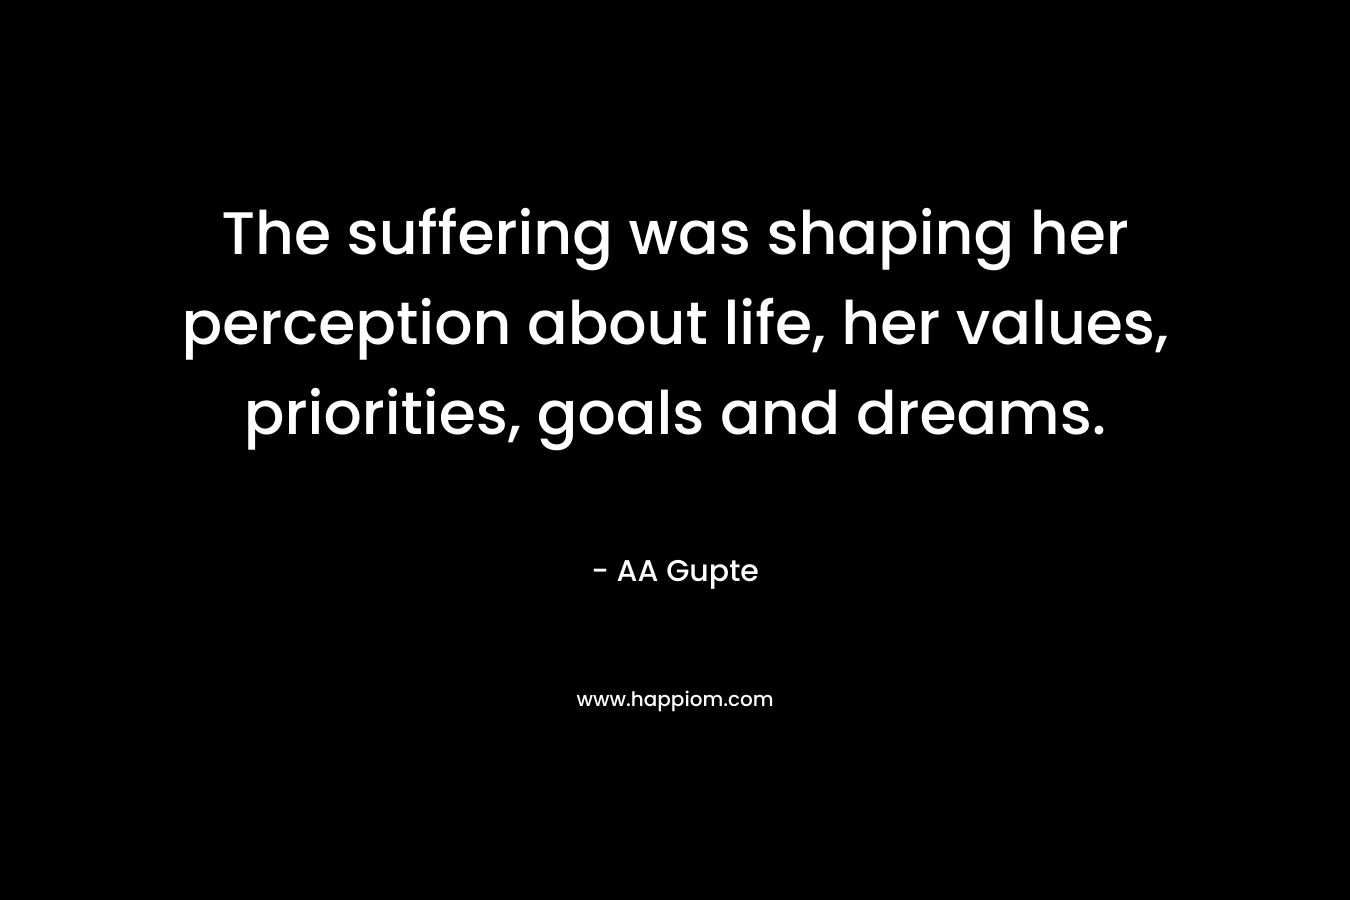 The suffering was shaping her perception about life, her values, priorities, goals and dreams. – AA Gupte